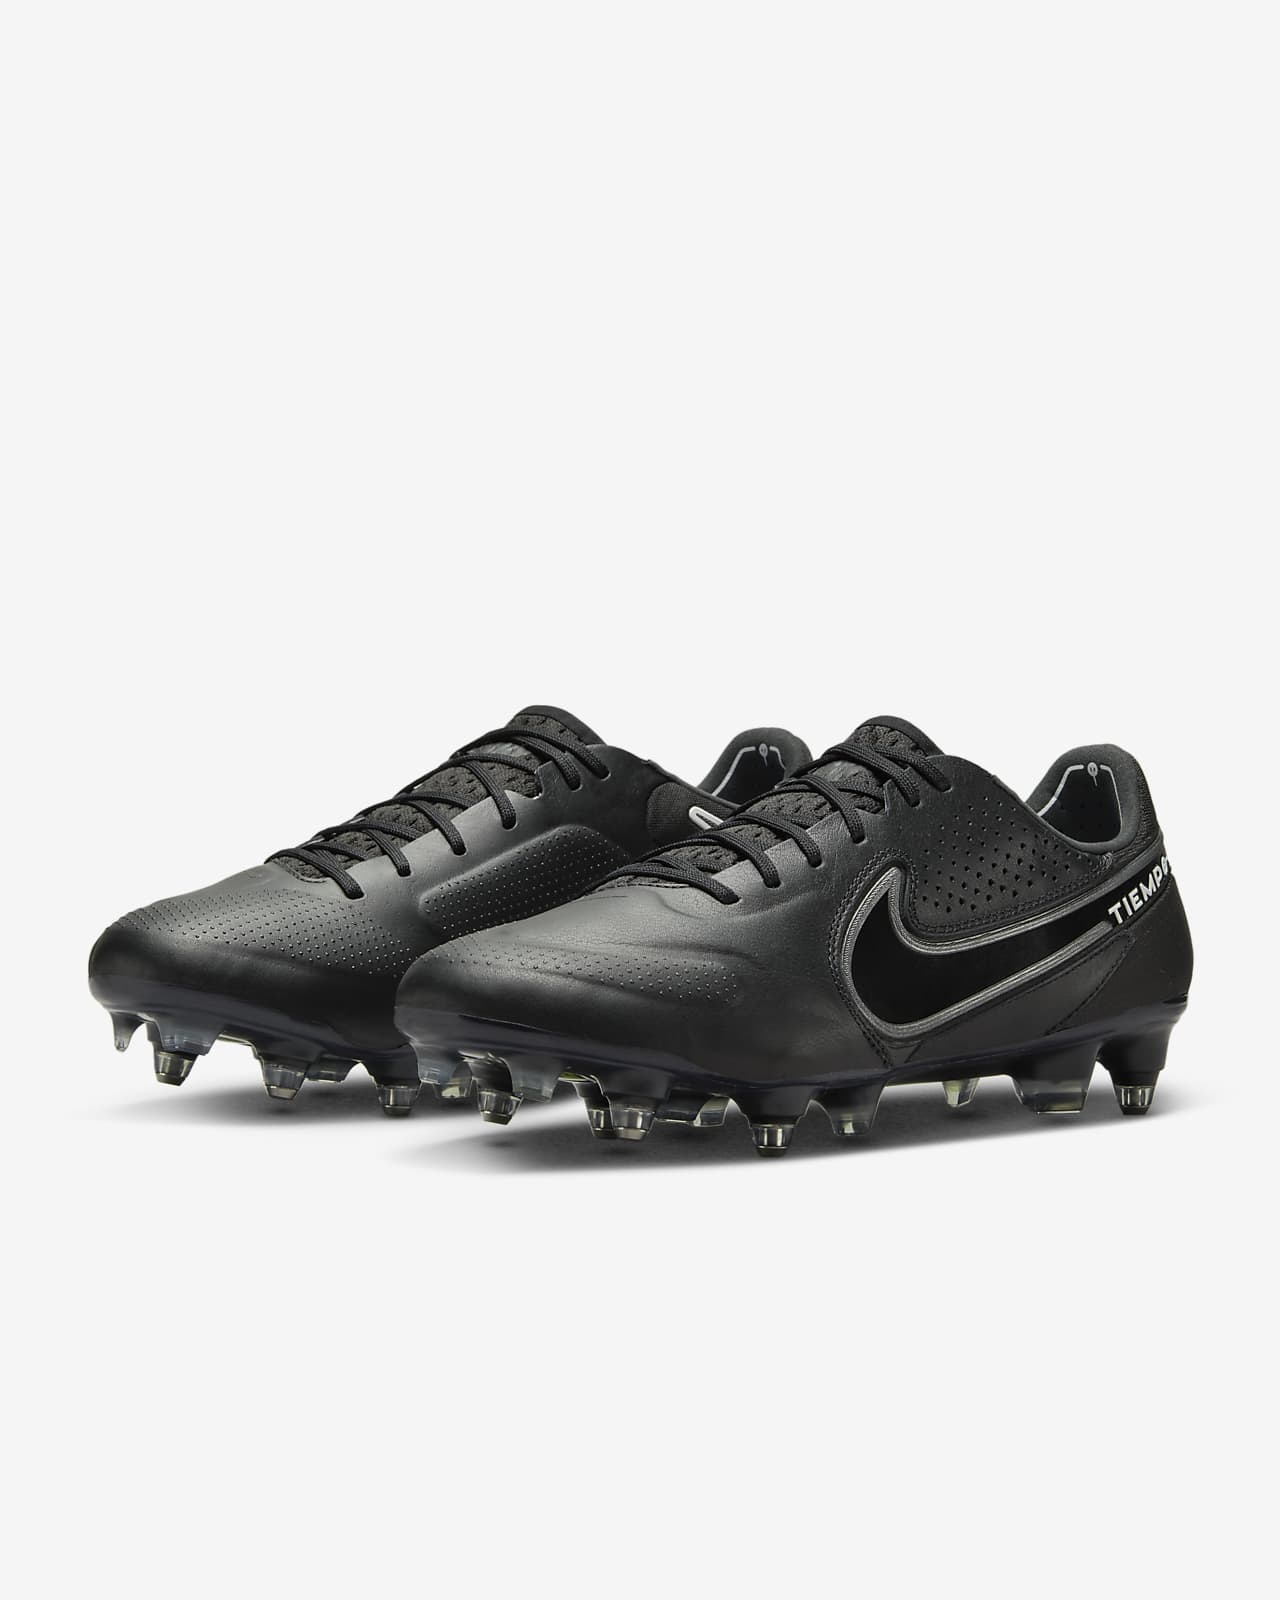 Nike Tiempo Legend Pro Ag Pro Artificial Ground Football Boot